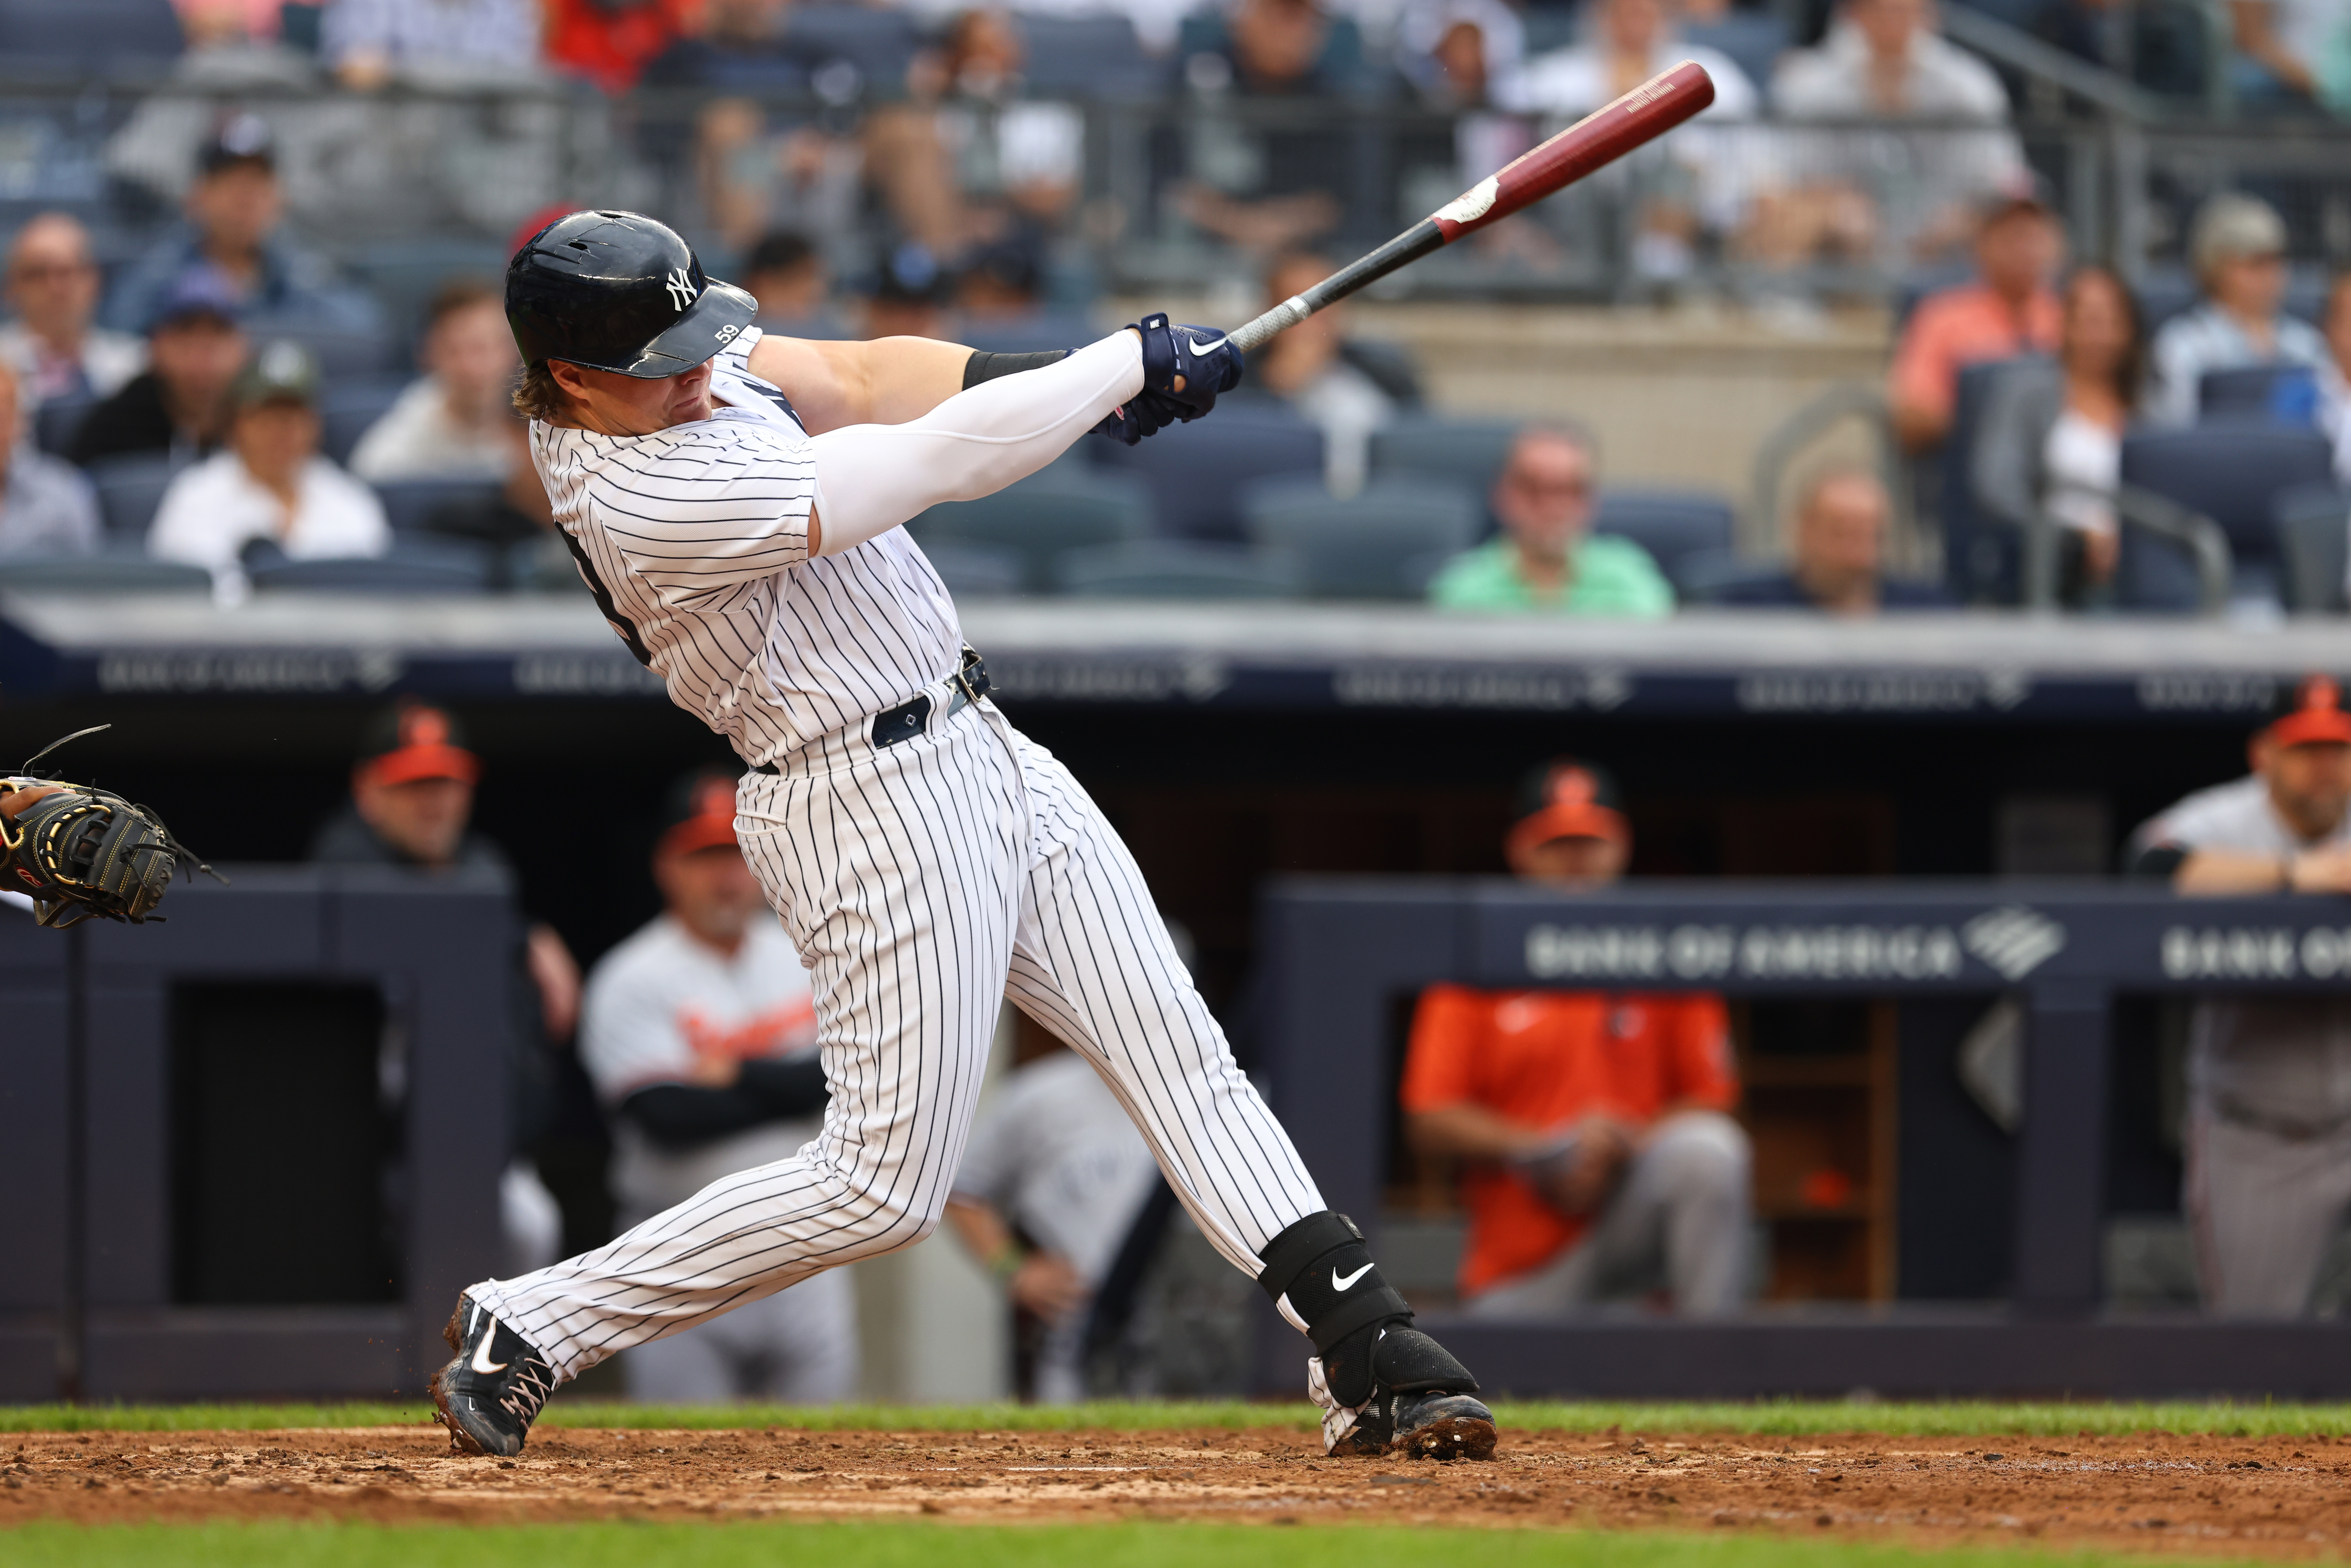 Padres acquire 1B/DH Luke Voit from Yankees per reports